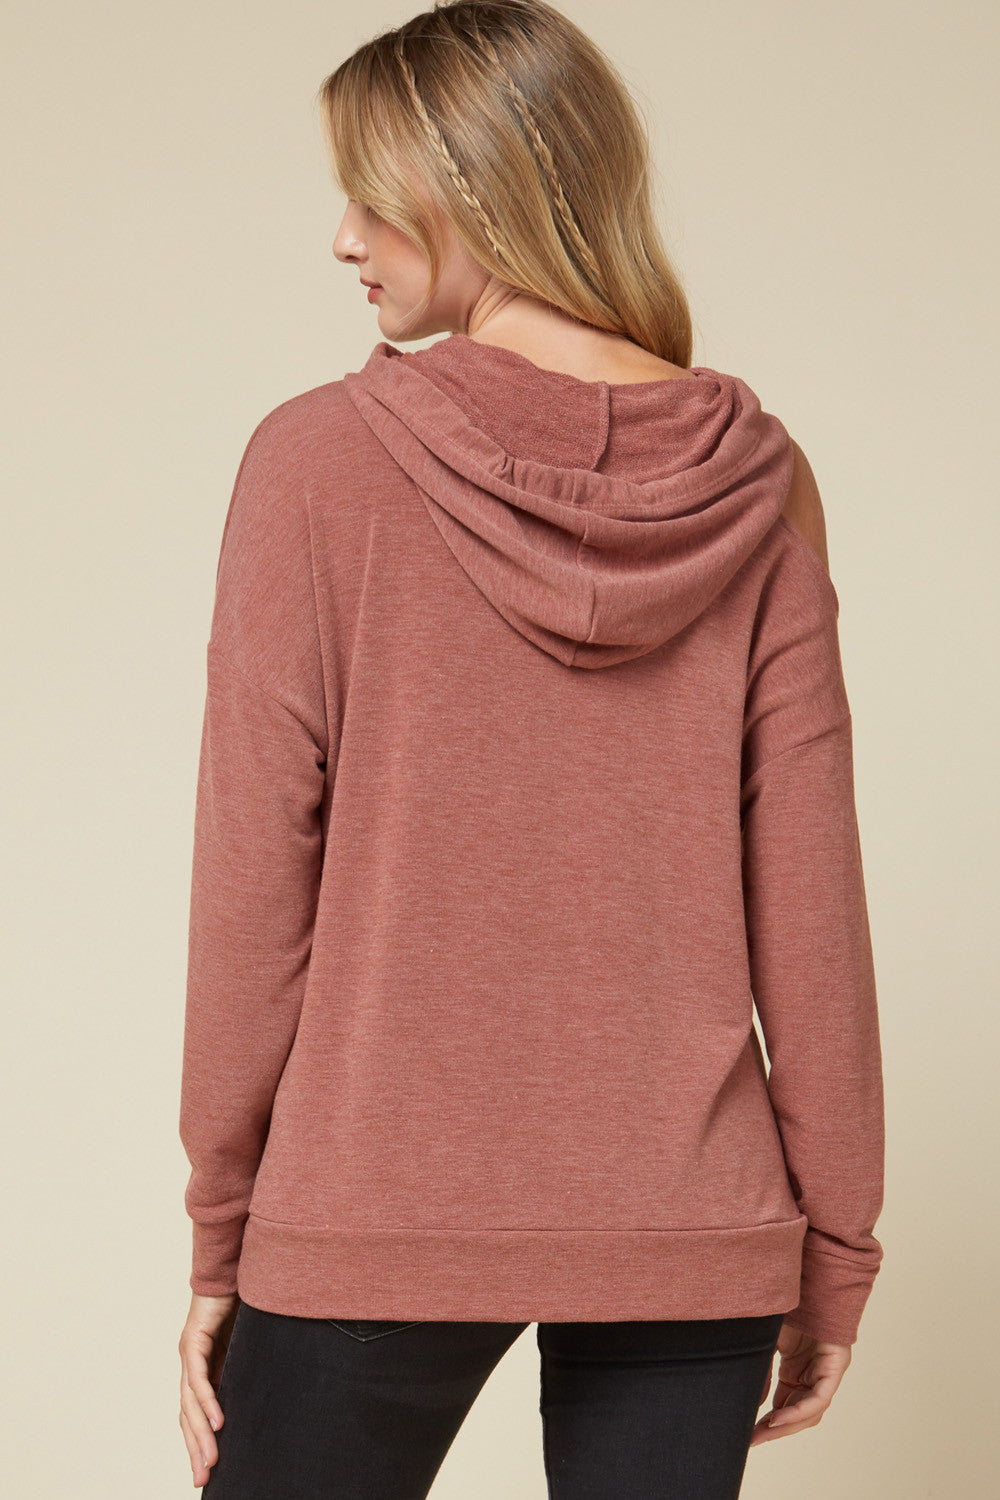 Solid Fleece Hooded Pullover Sweater w/Cold Shoulder Detail